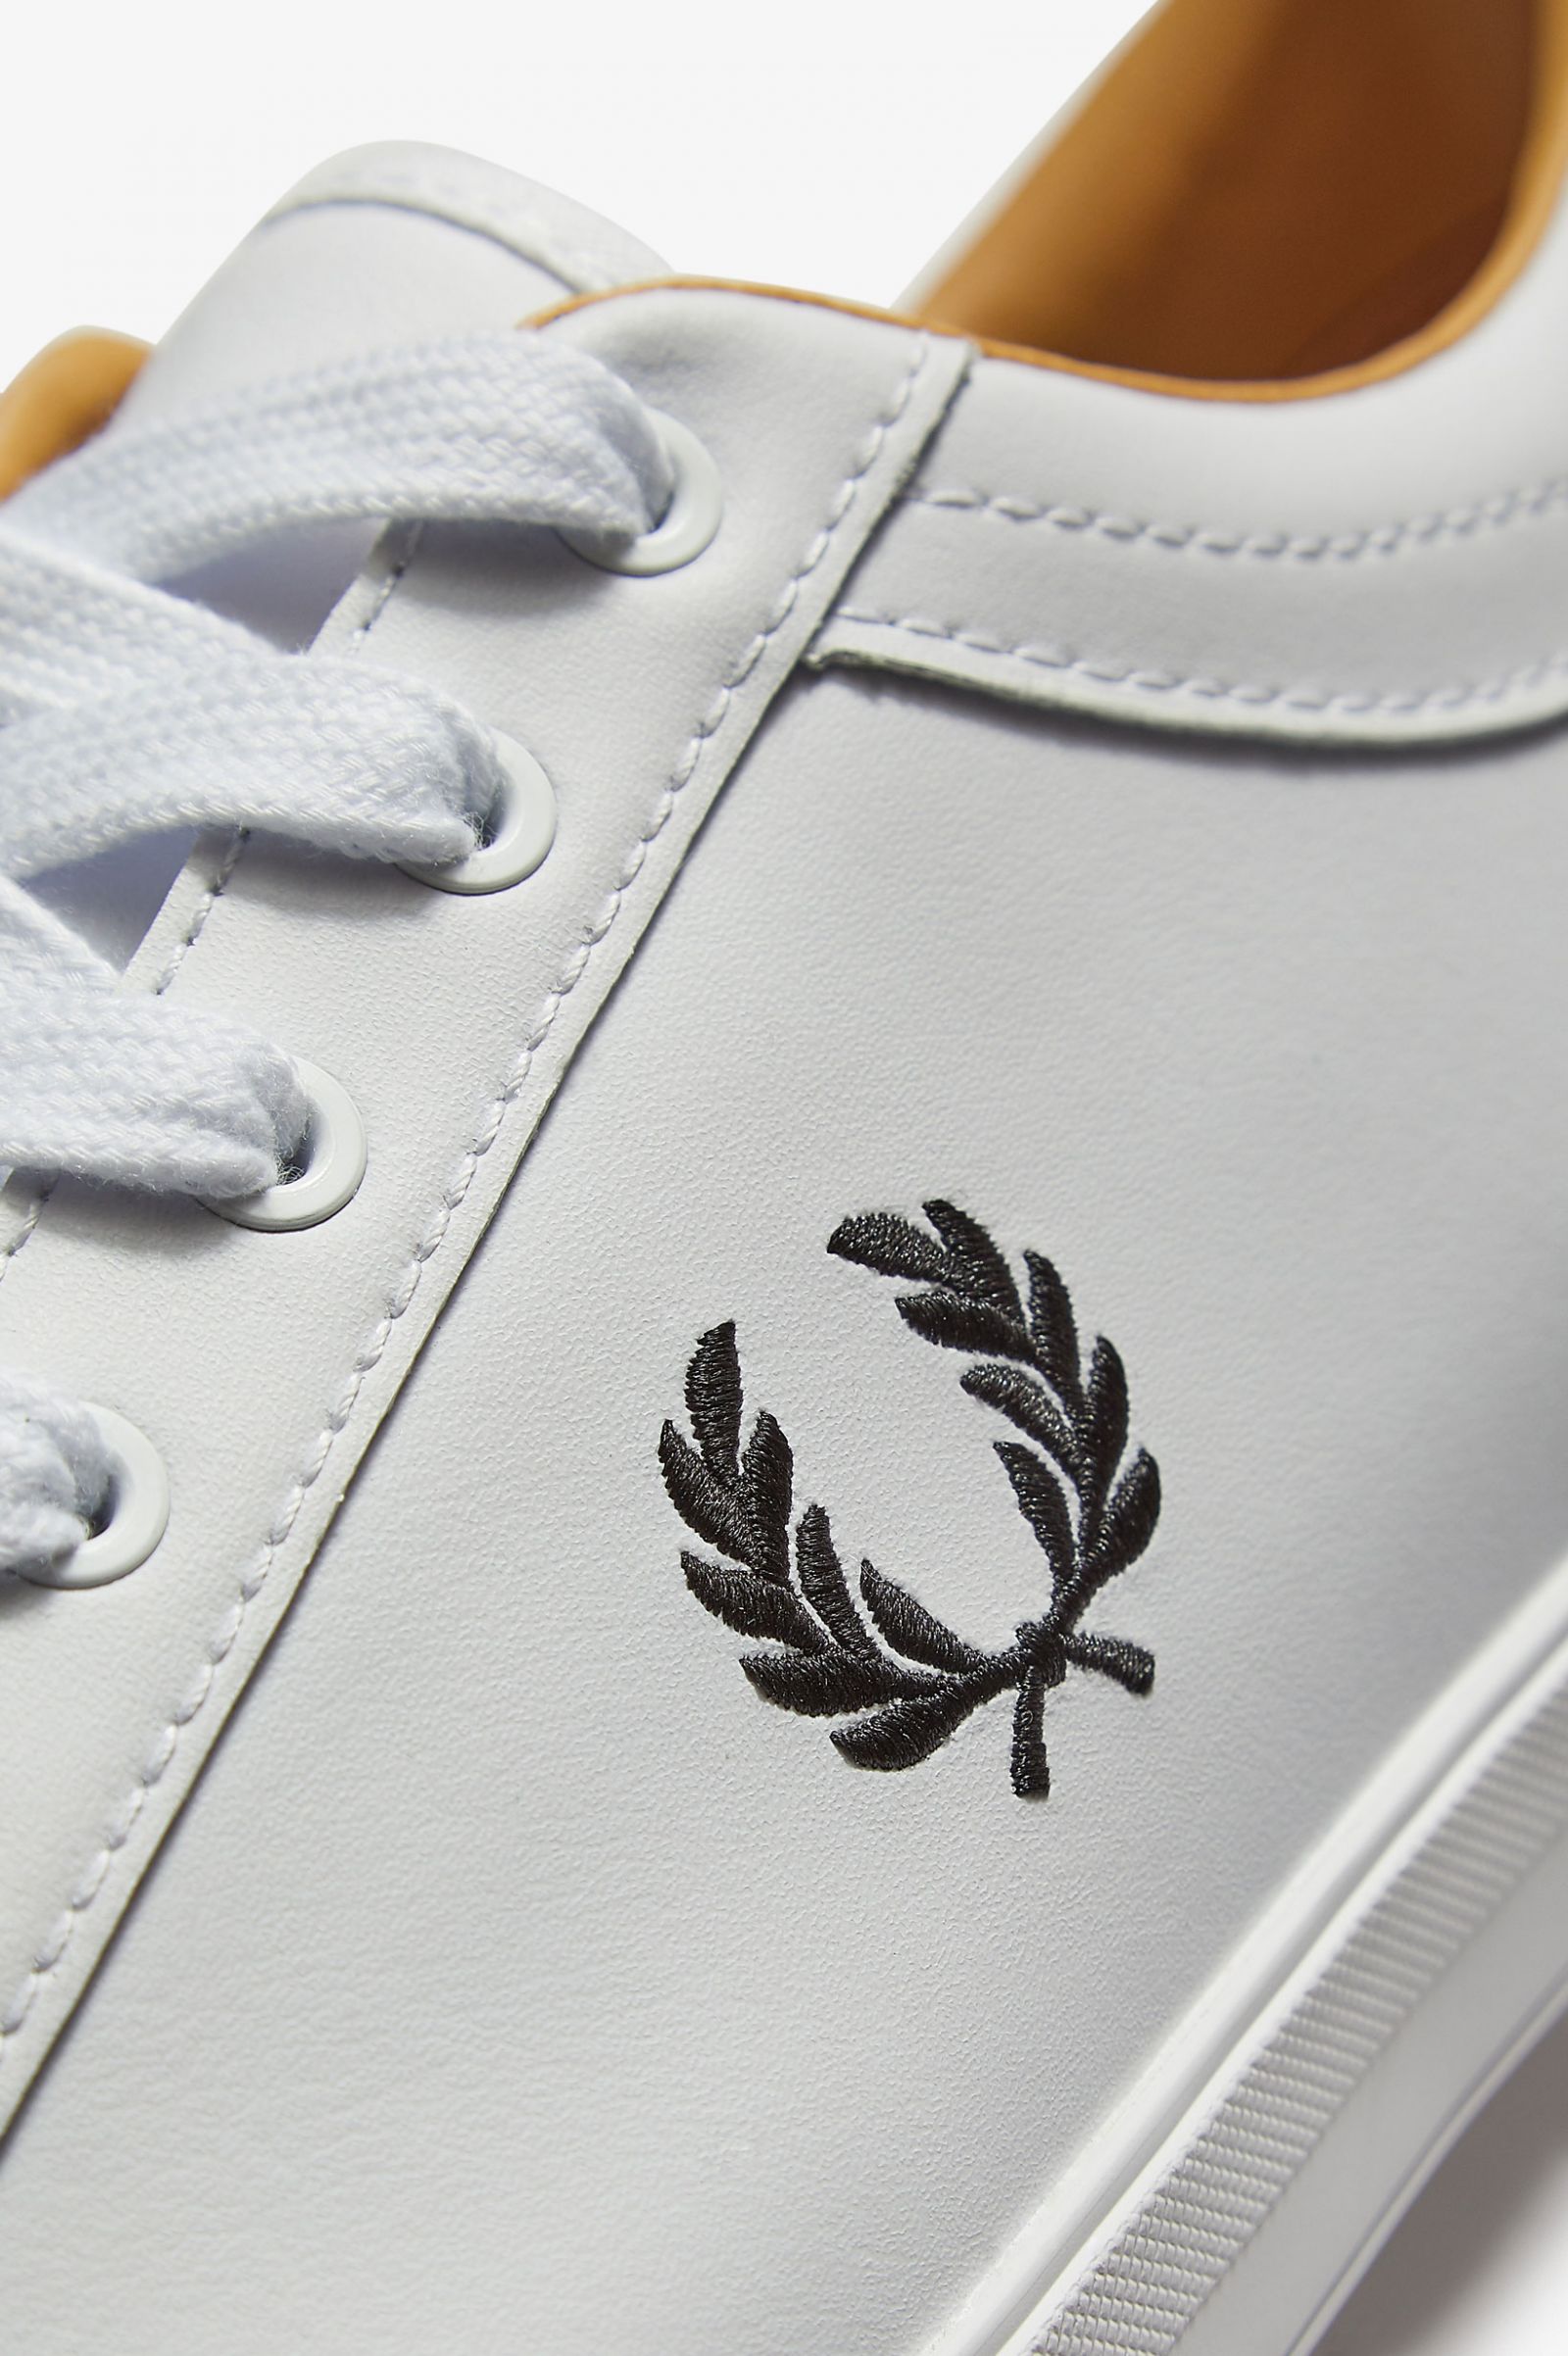 Loafers \u0026 Designer Trainers | Fred Perry UK